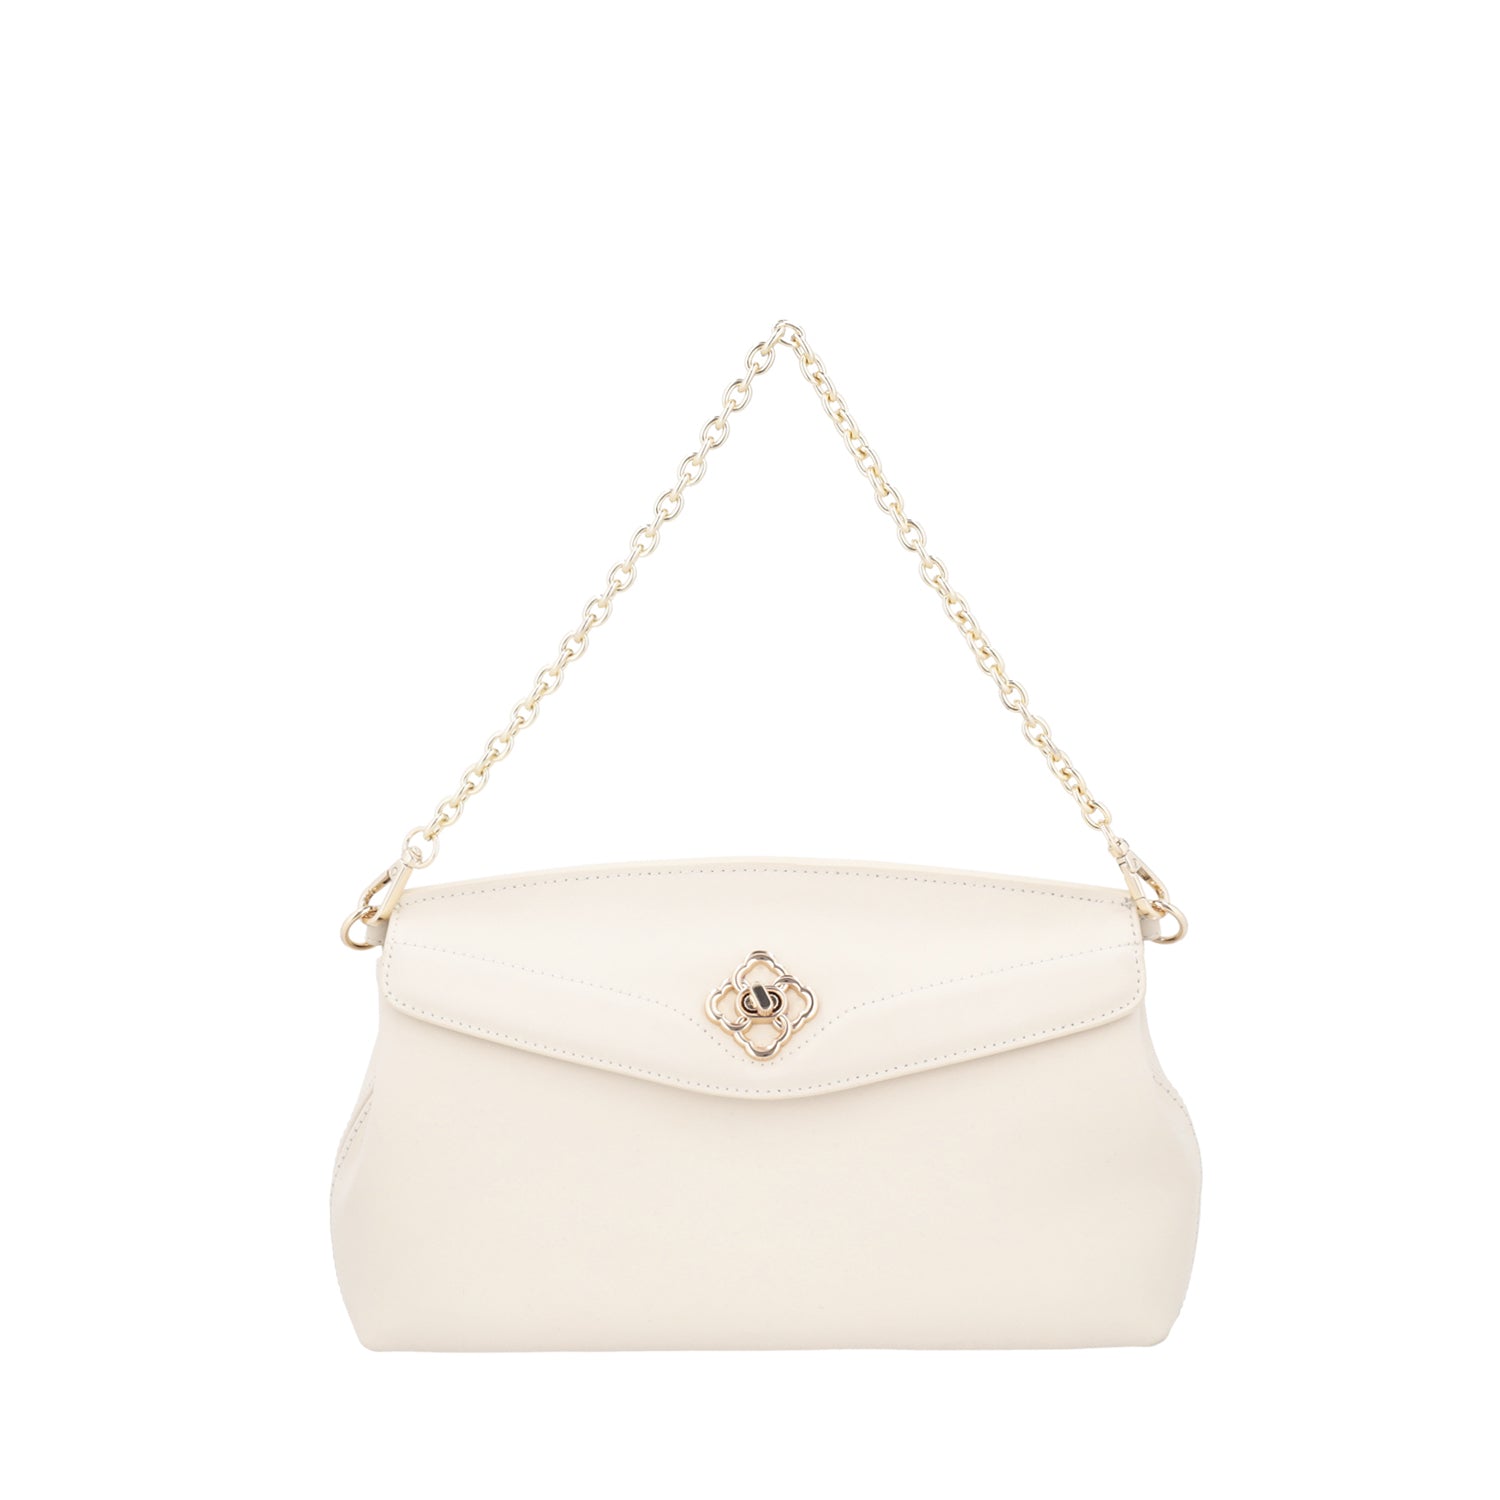 IVORY BUCANEVE POCHETTE WITH DOUBLE CHAIN